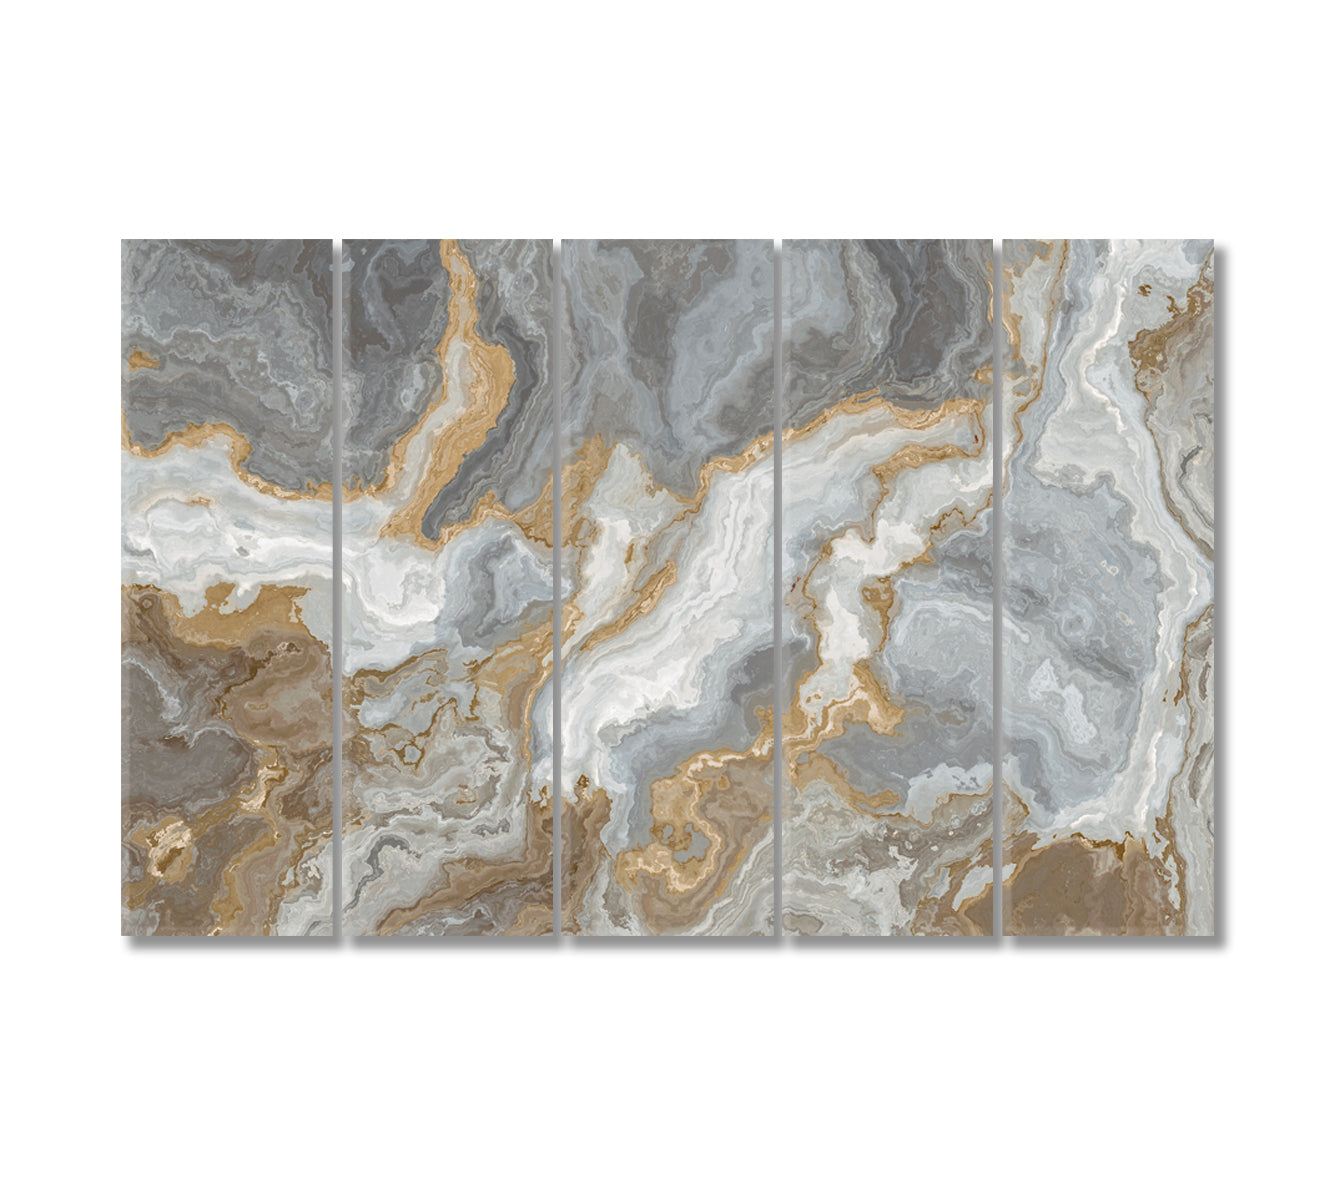 Gray Marble with Golden Veins Canvas Print-Canvas Print-CetArt-5 Panels-36x24 inches-CetArt